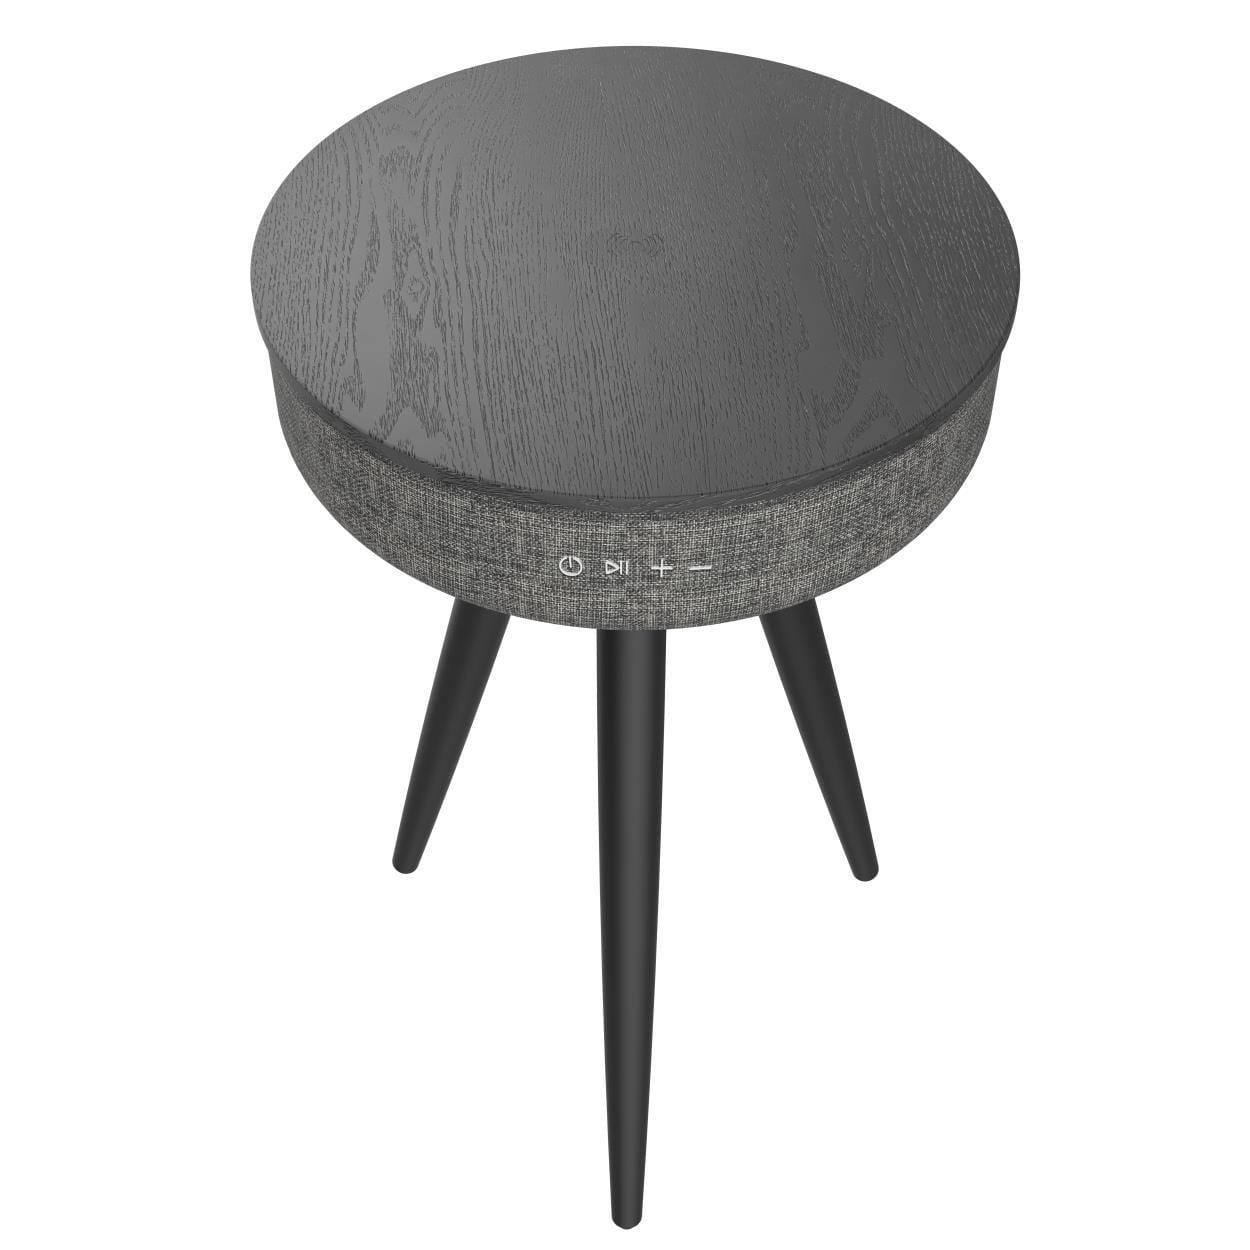 Black Tripod Bluetooth Speaker Table - Accent Table